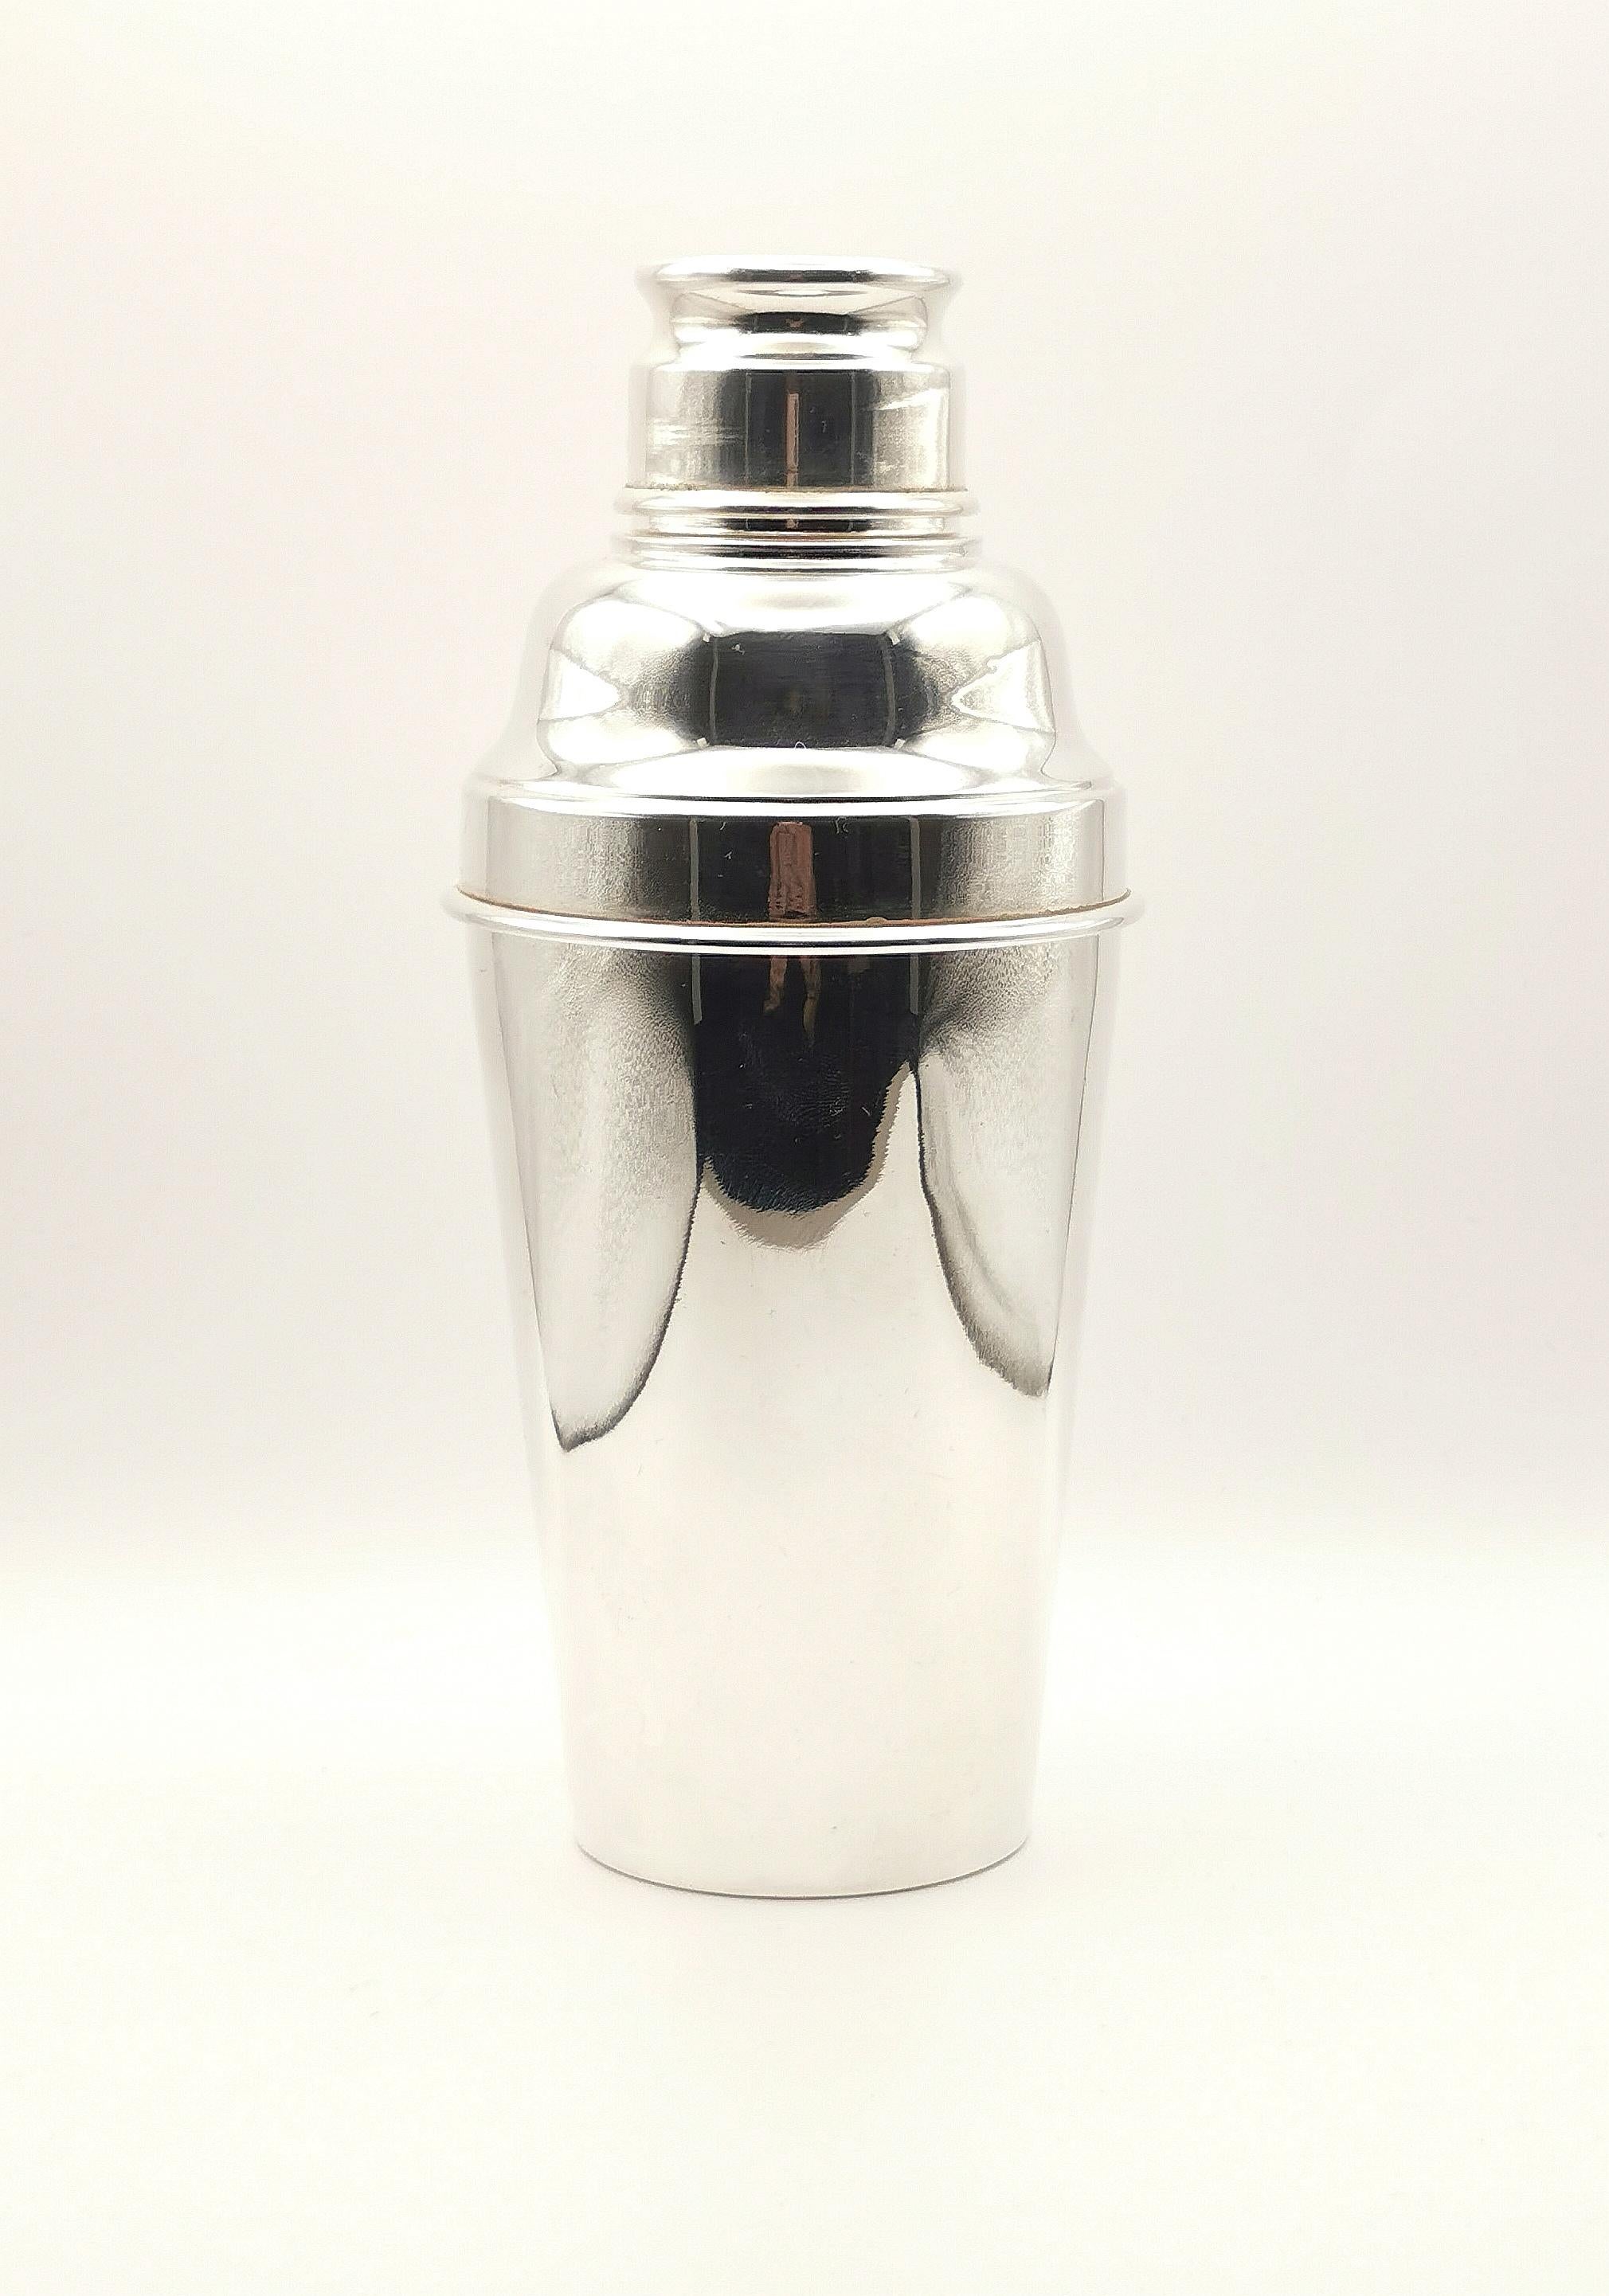 An attractive vintage Art Deco era silver plated cocktail shaker.

The perfect accompaniment to the vintage bar, adding a touch of Art Deco glam to your collection.

It is made from silver plated metal and has an outer lid that doubles as a measure